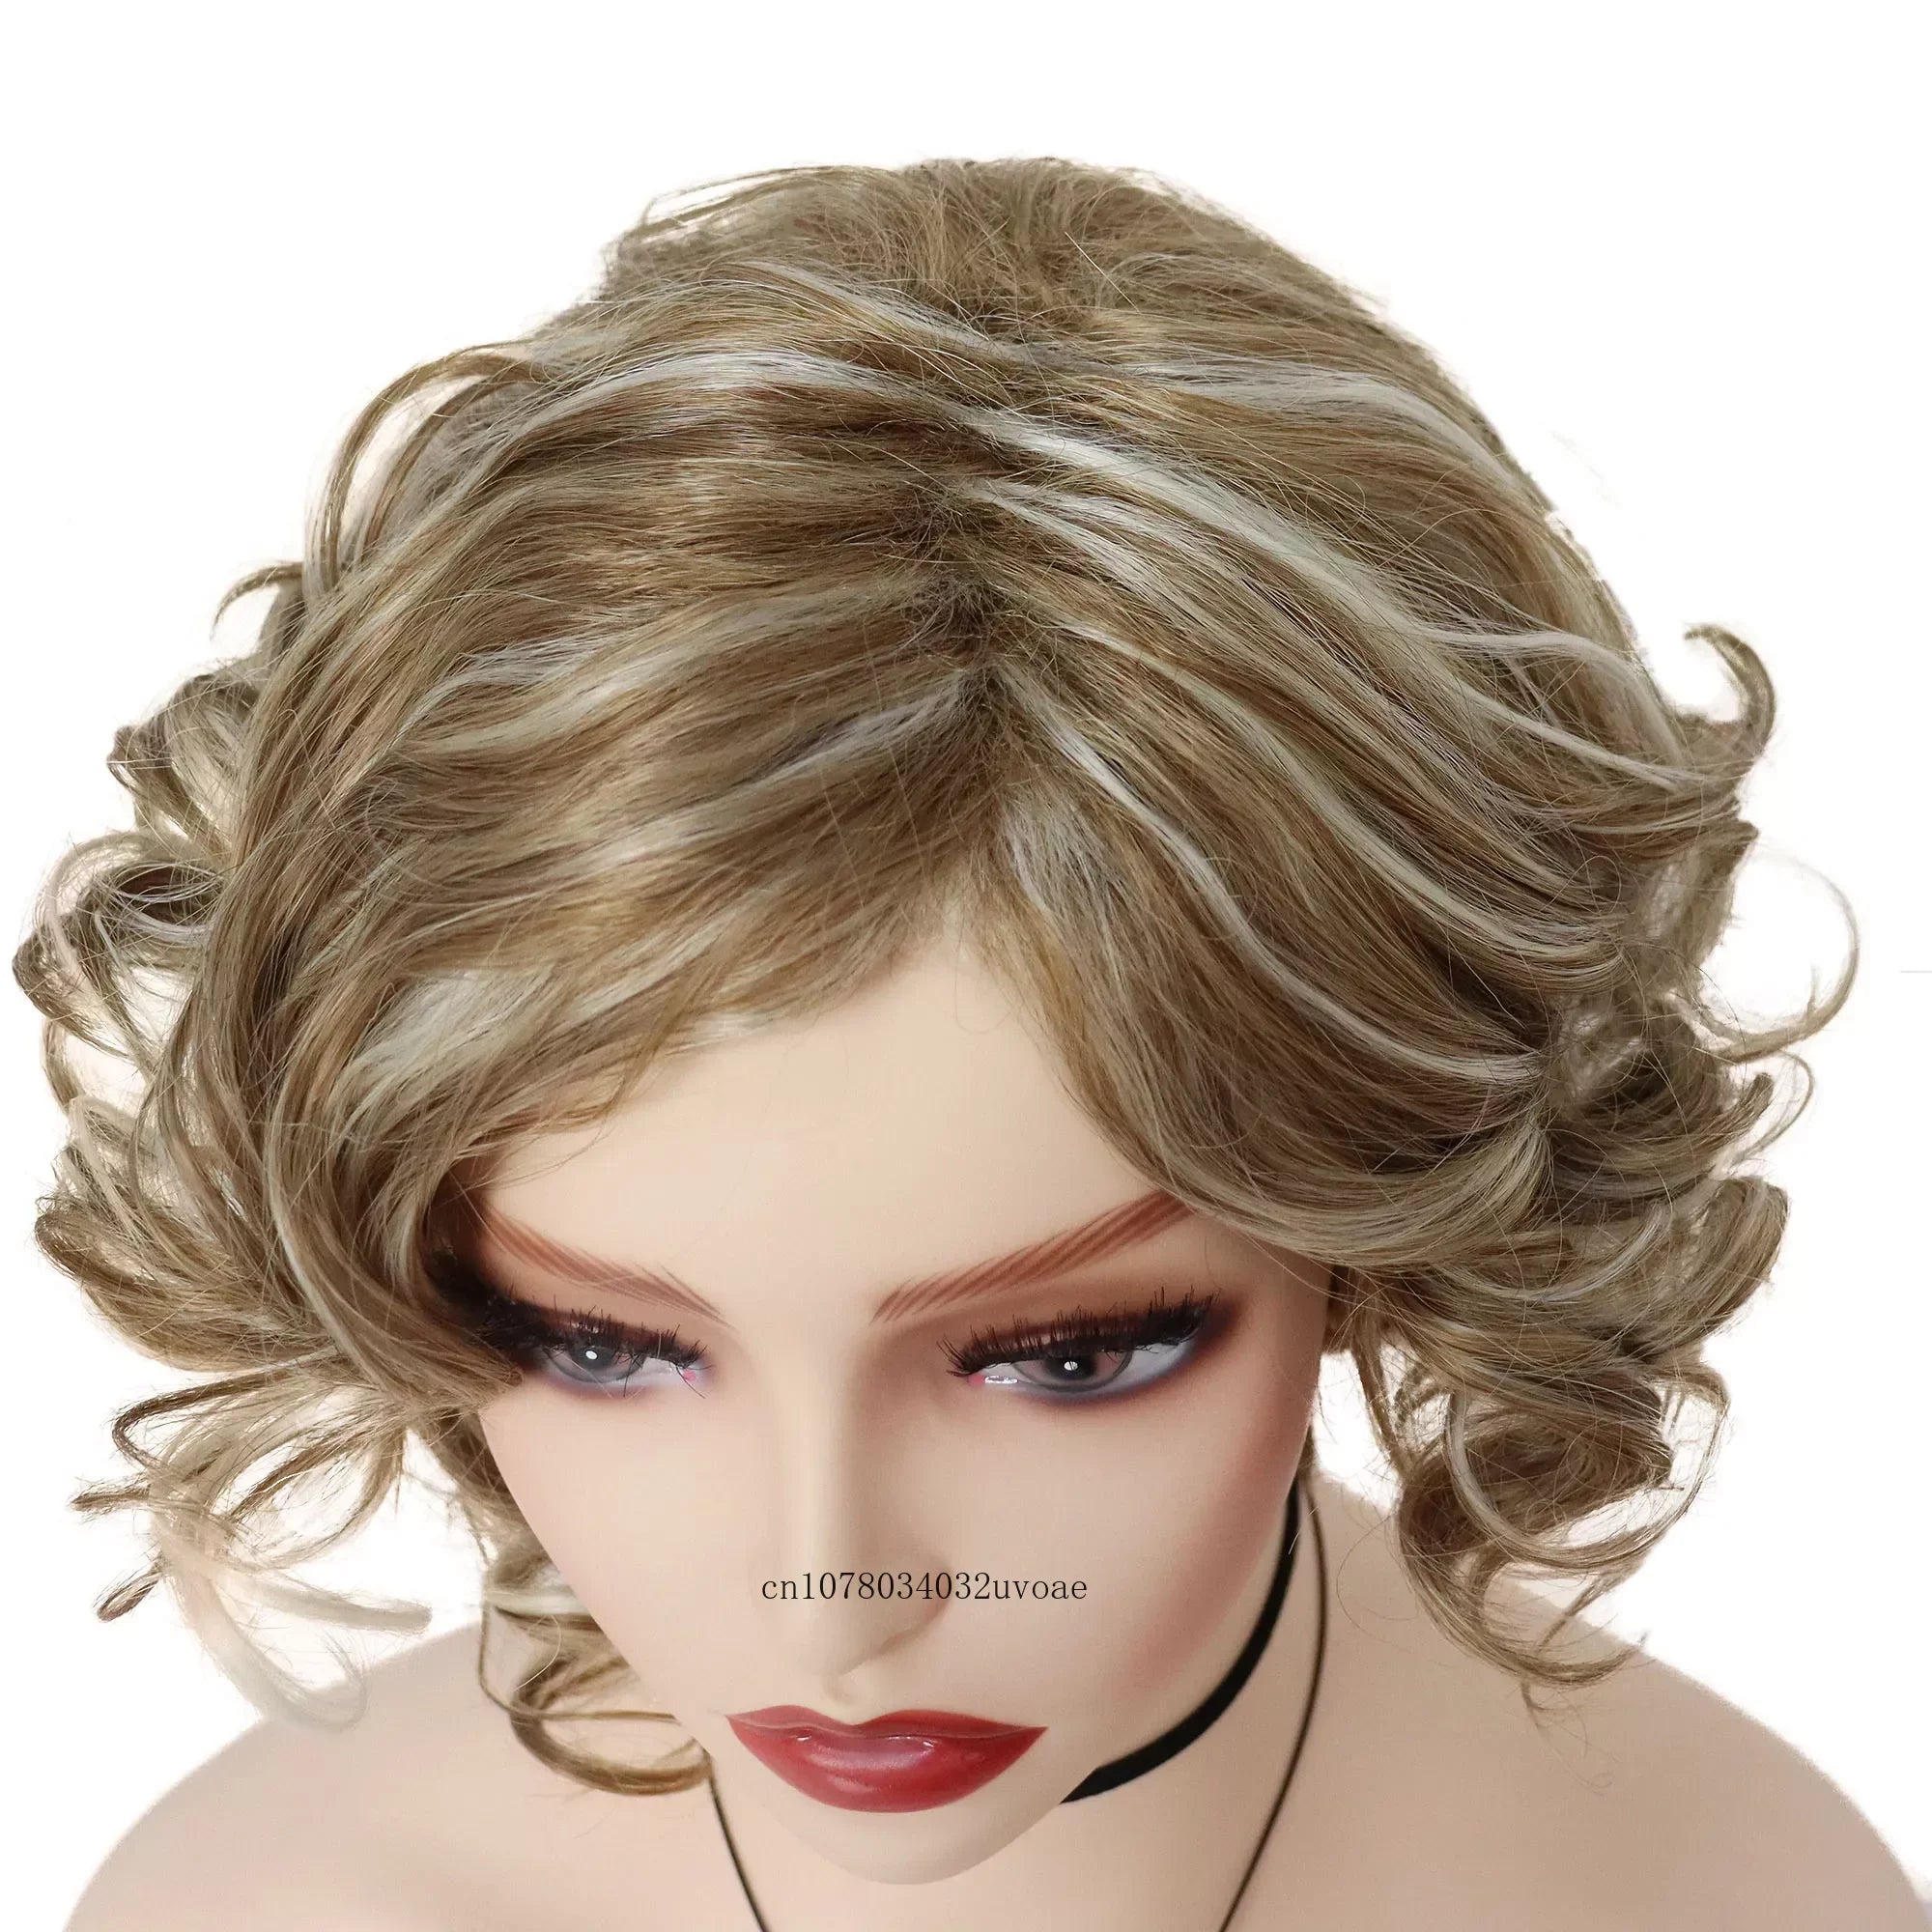 Mix Blonde Wig Short Curly Hair